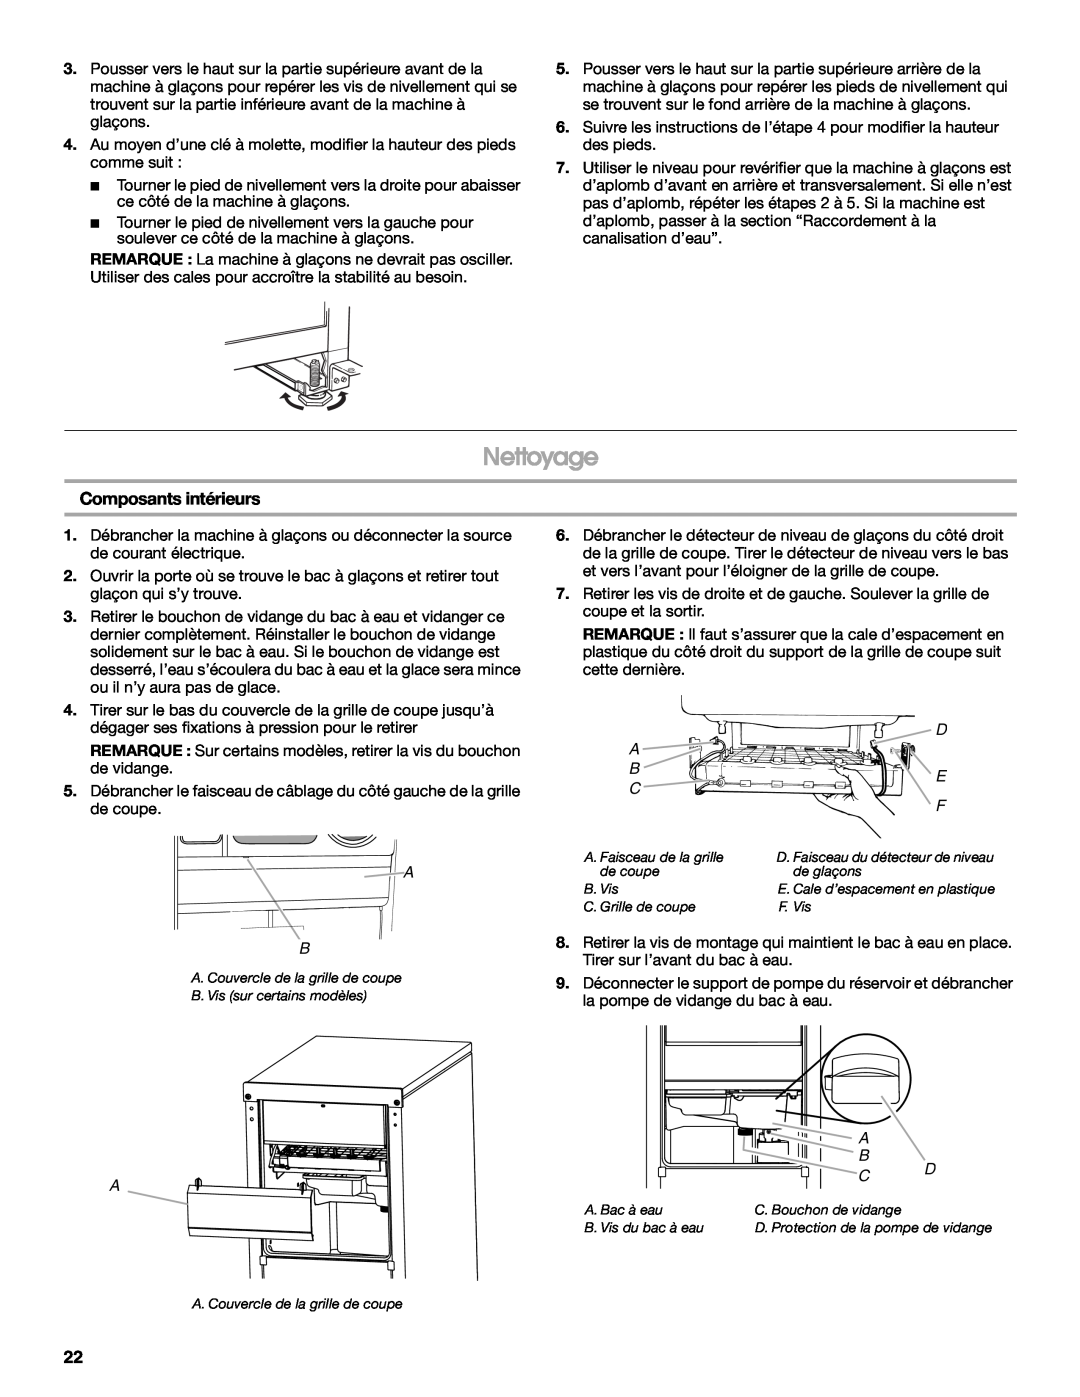 Whirlpool W10541636A important safety instructions Nettoyage, Composants intérieurs 